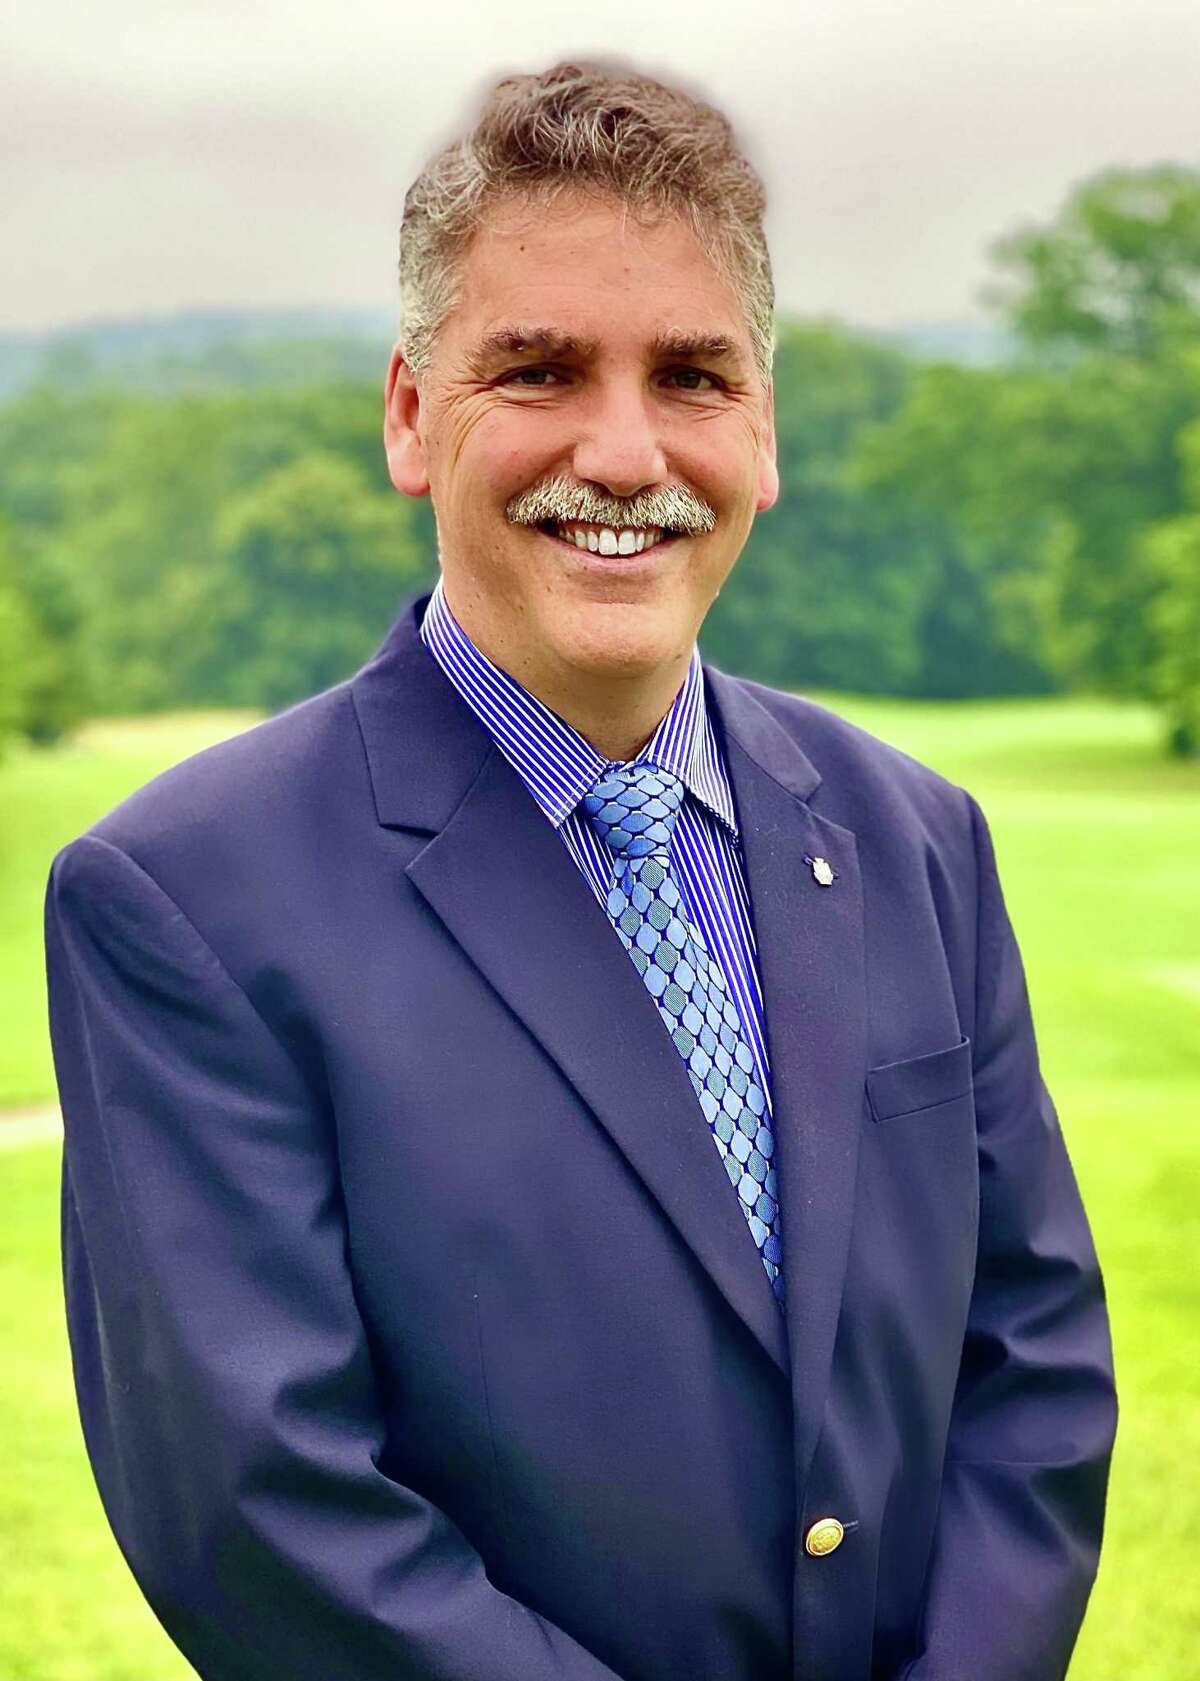 John Diehl, Southbury Democratic candidate for First Selectman